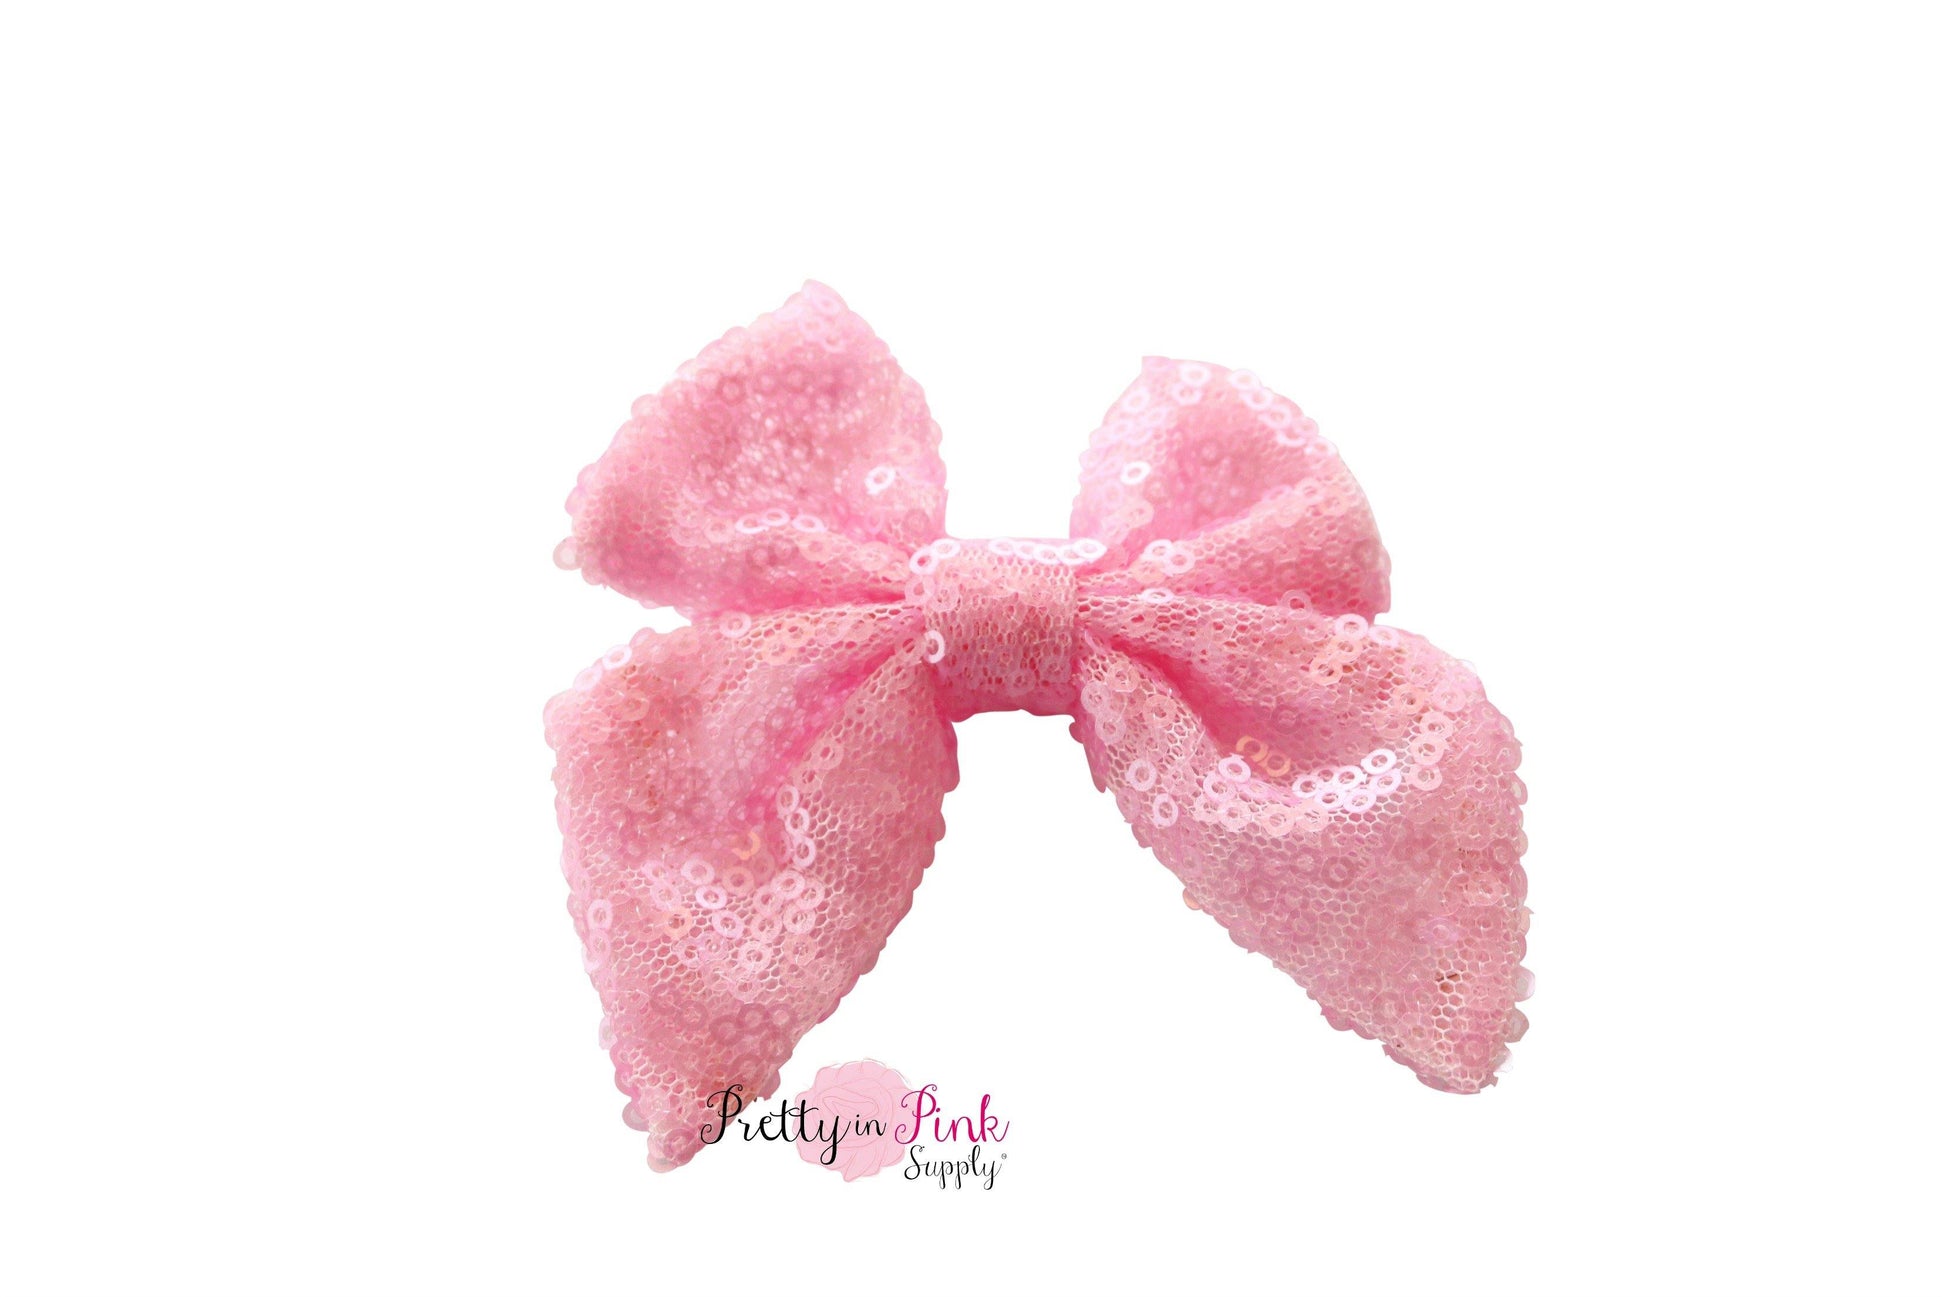 Sequin TAIL Bows 3" - Pretty in Pink Supply